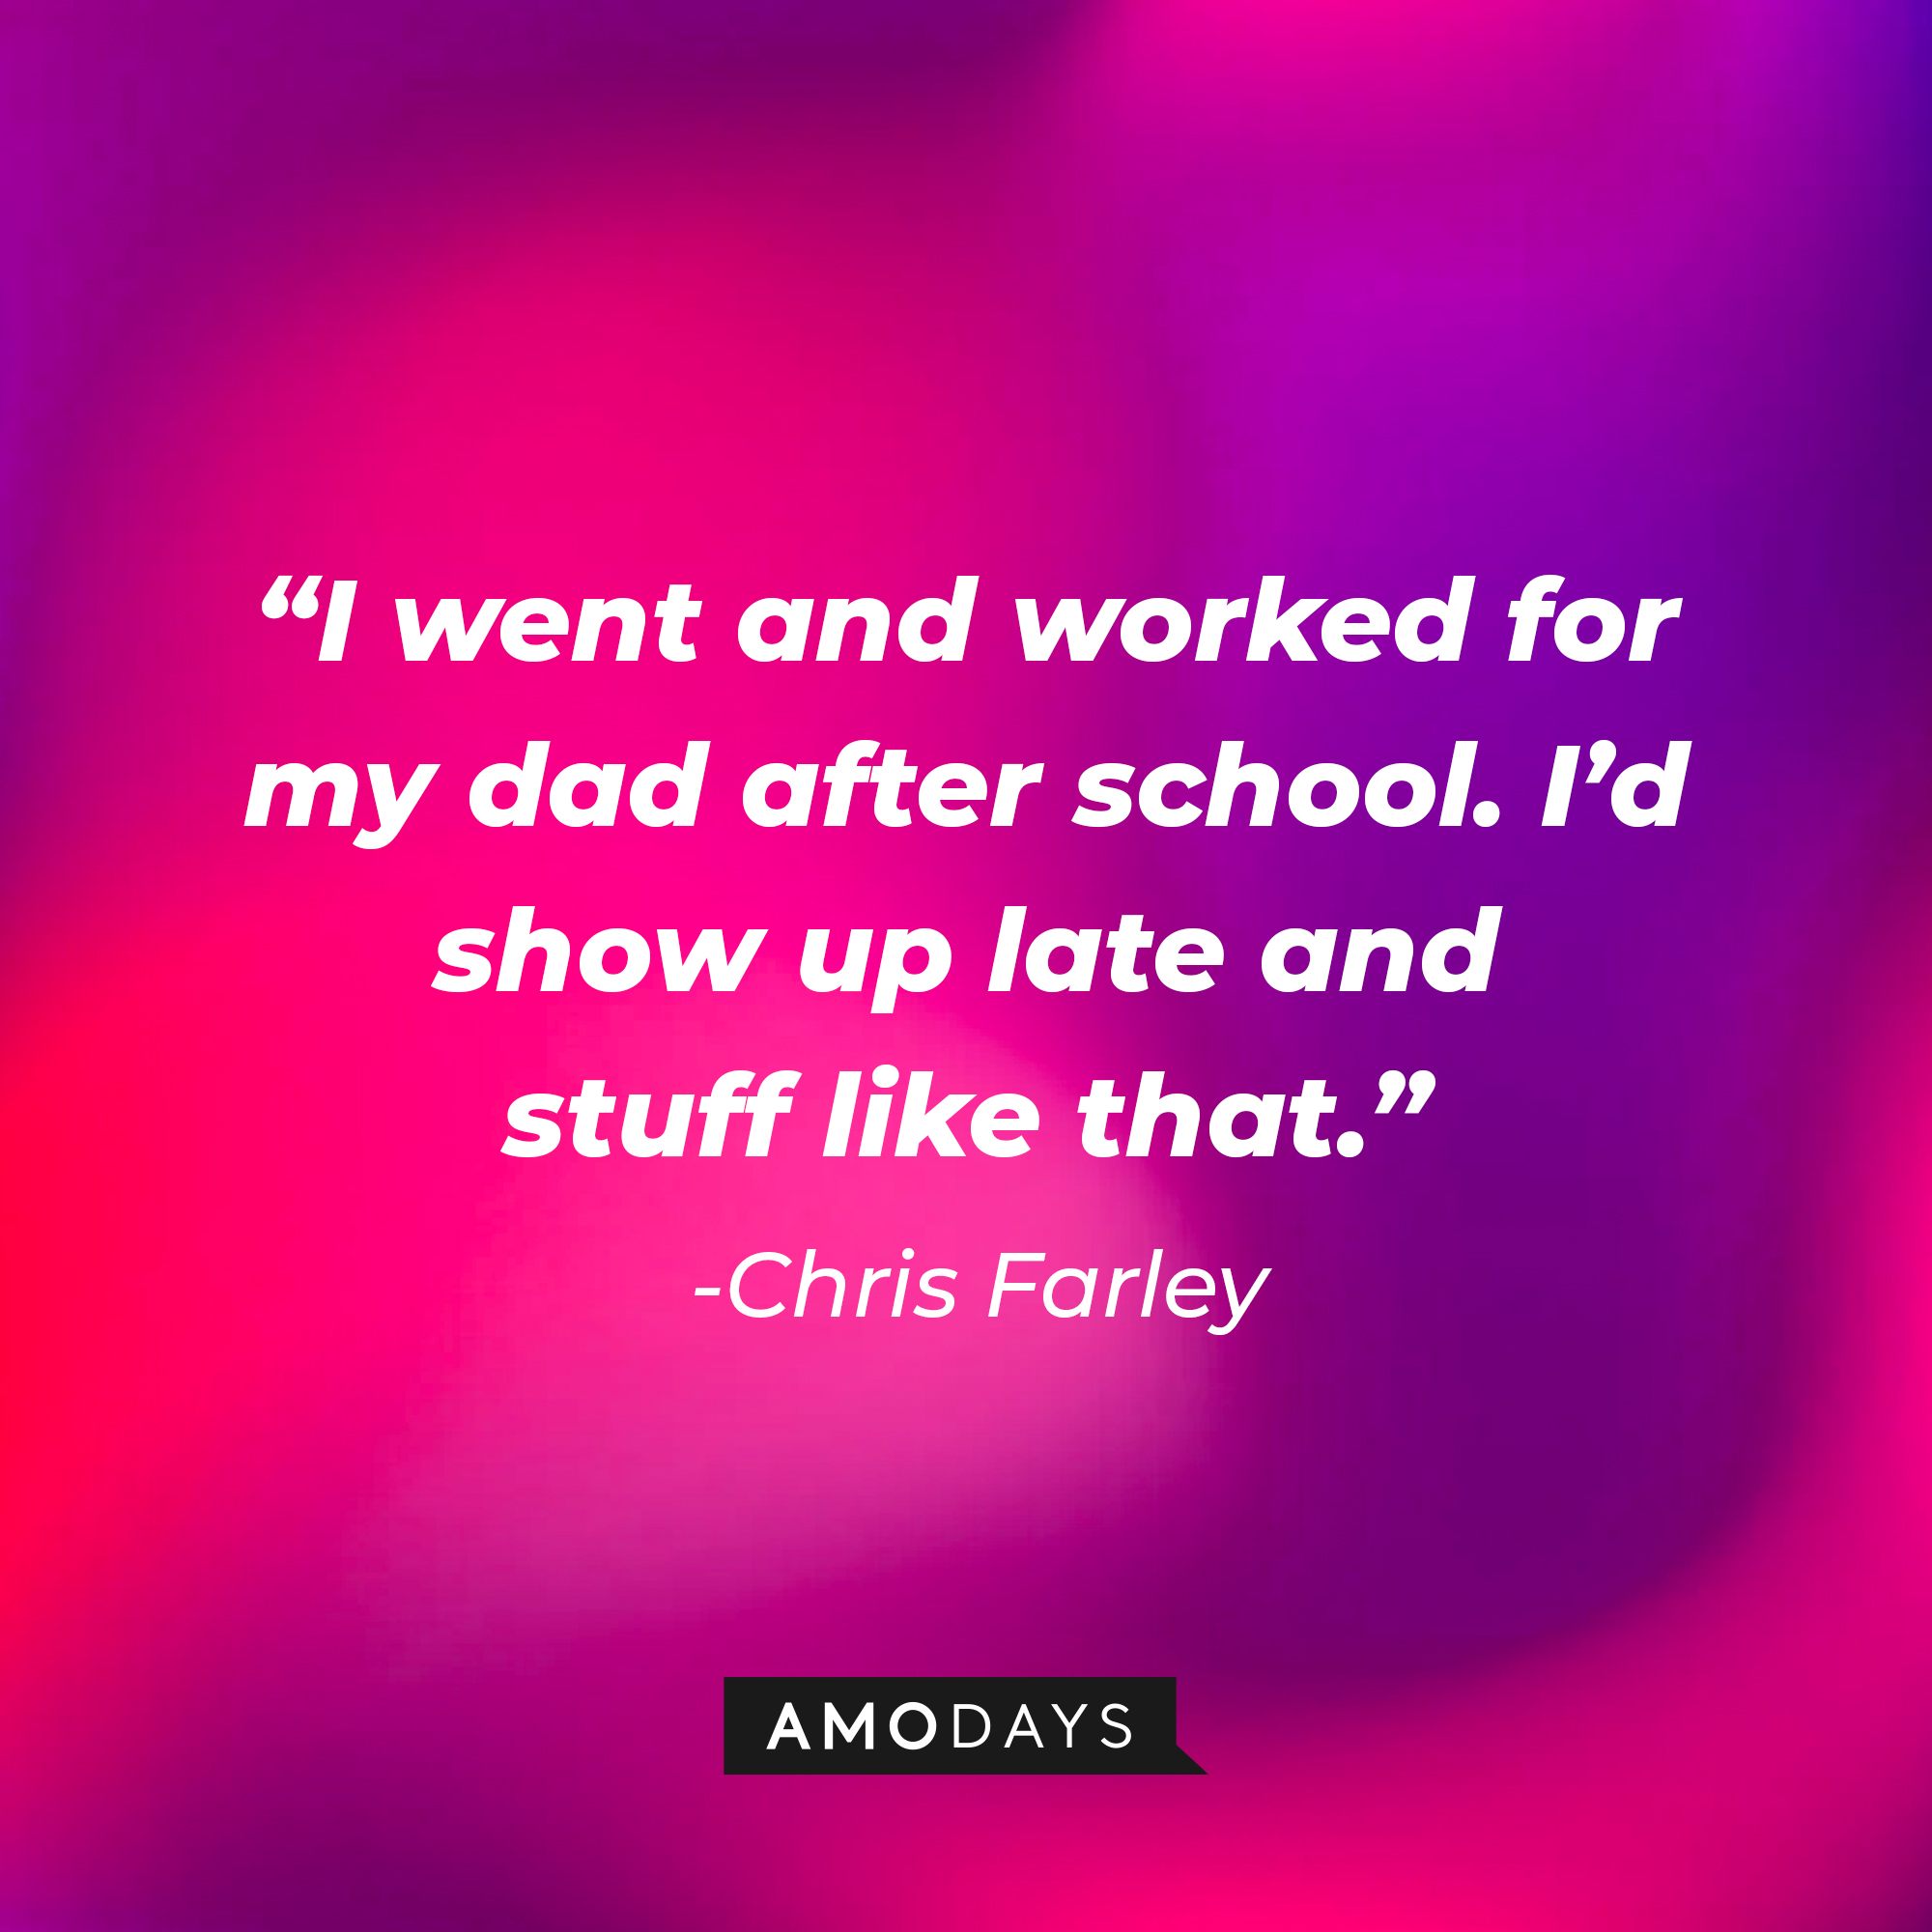 Chris Farley's quote: “I went and worked for my dad after school. I’d show up late and stuff like that." | Source: Amodays